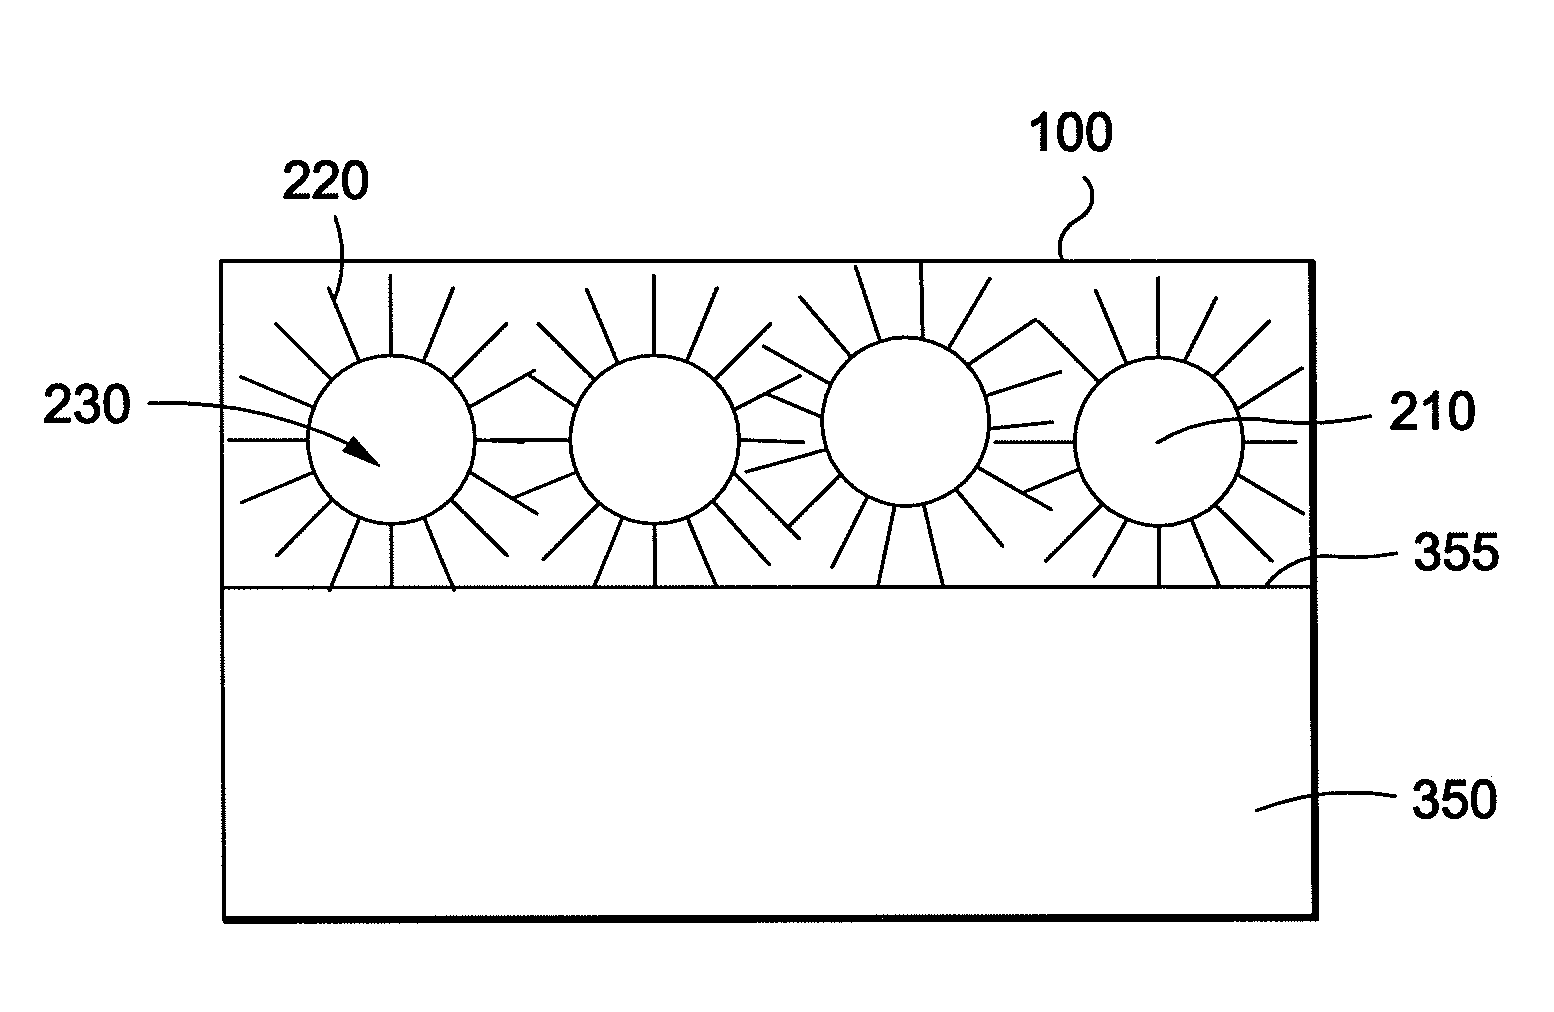 Cnt-based resistive heating for deicing composite structures